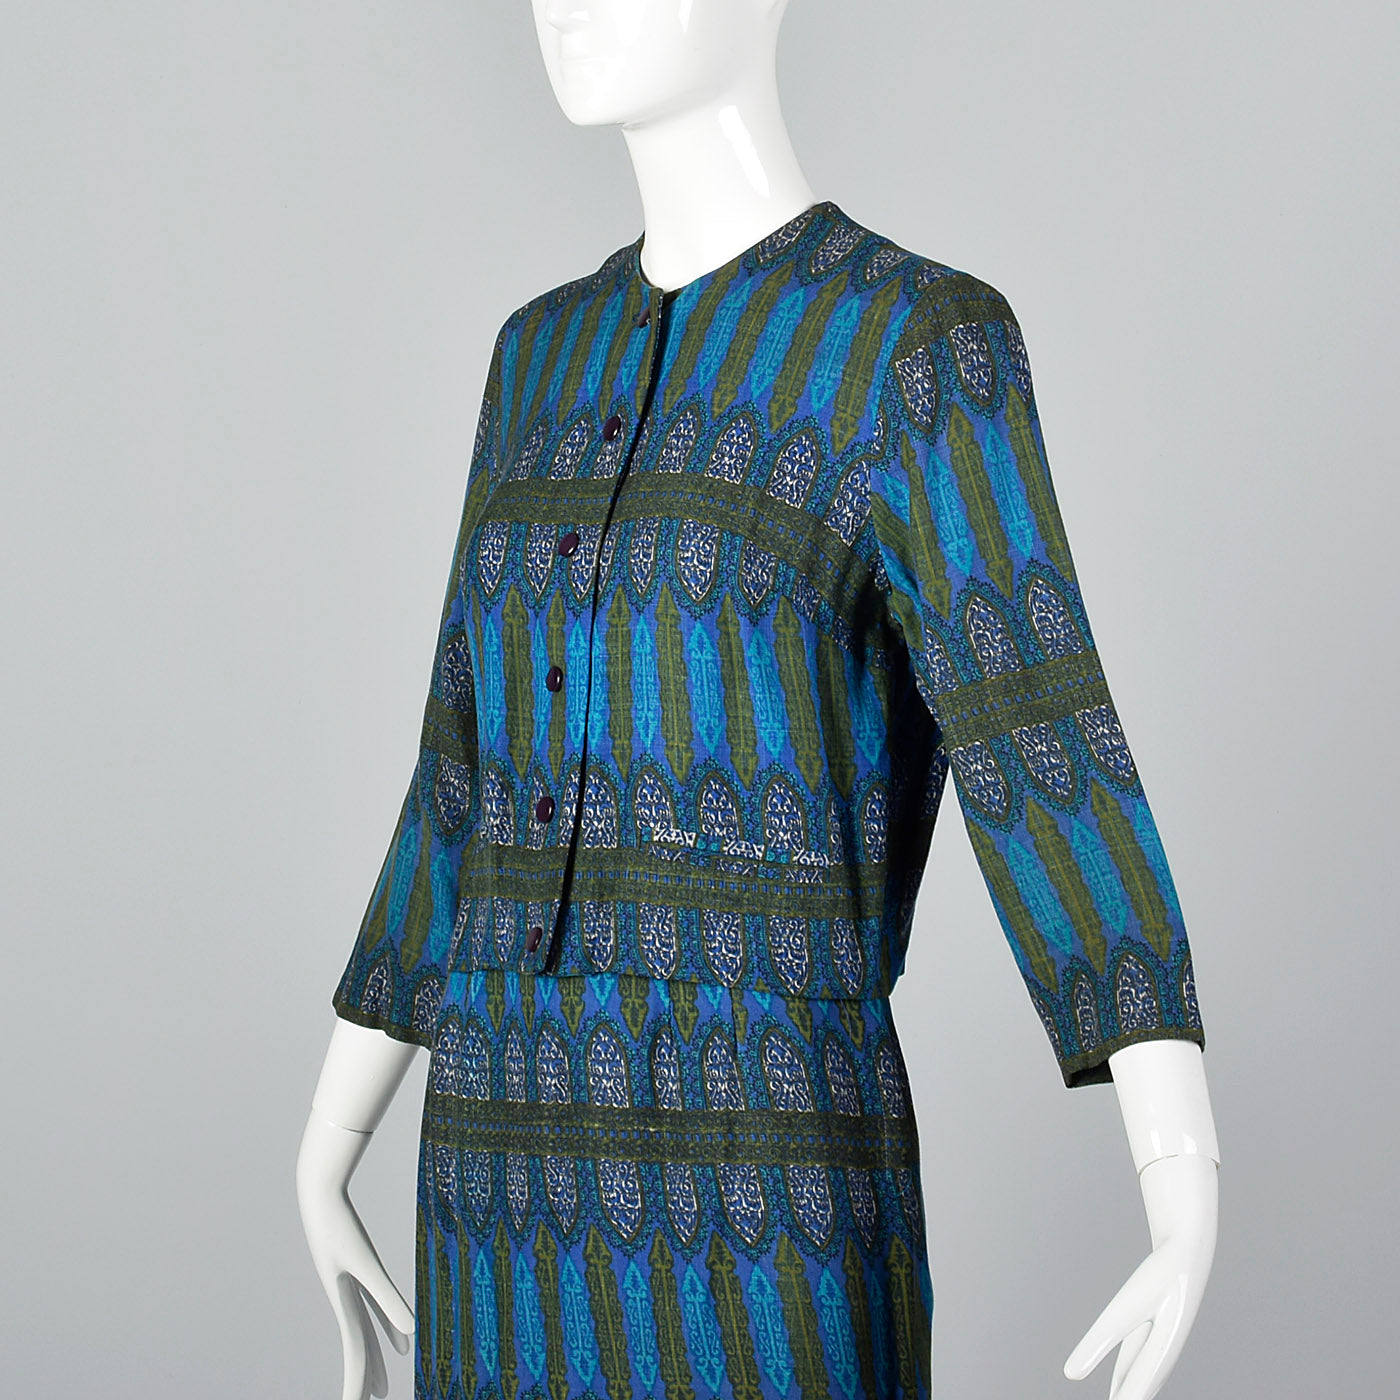 1960s Blue Printed Jacket with Matching Skirt